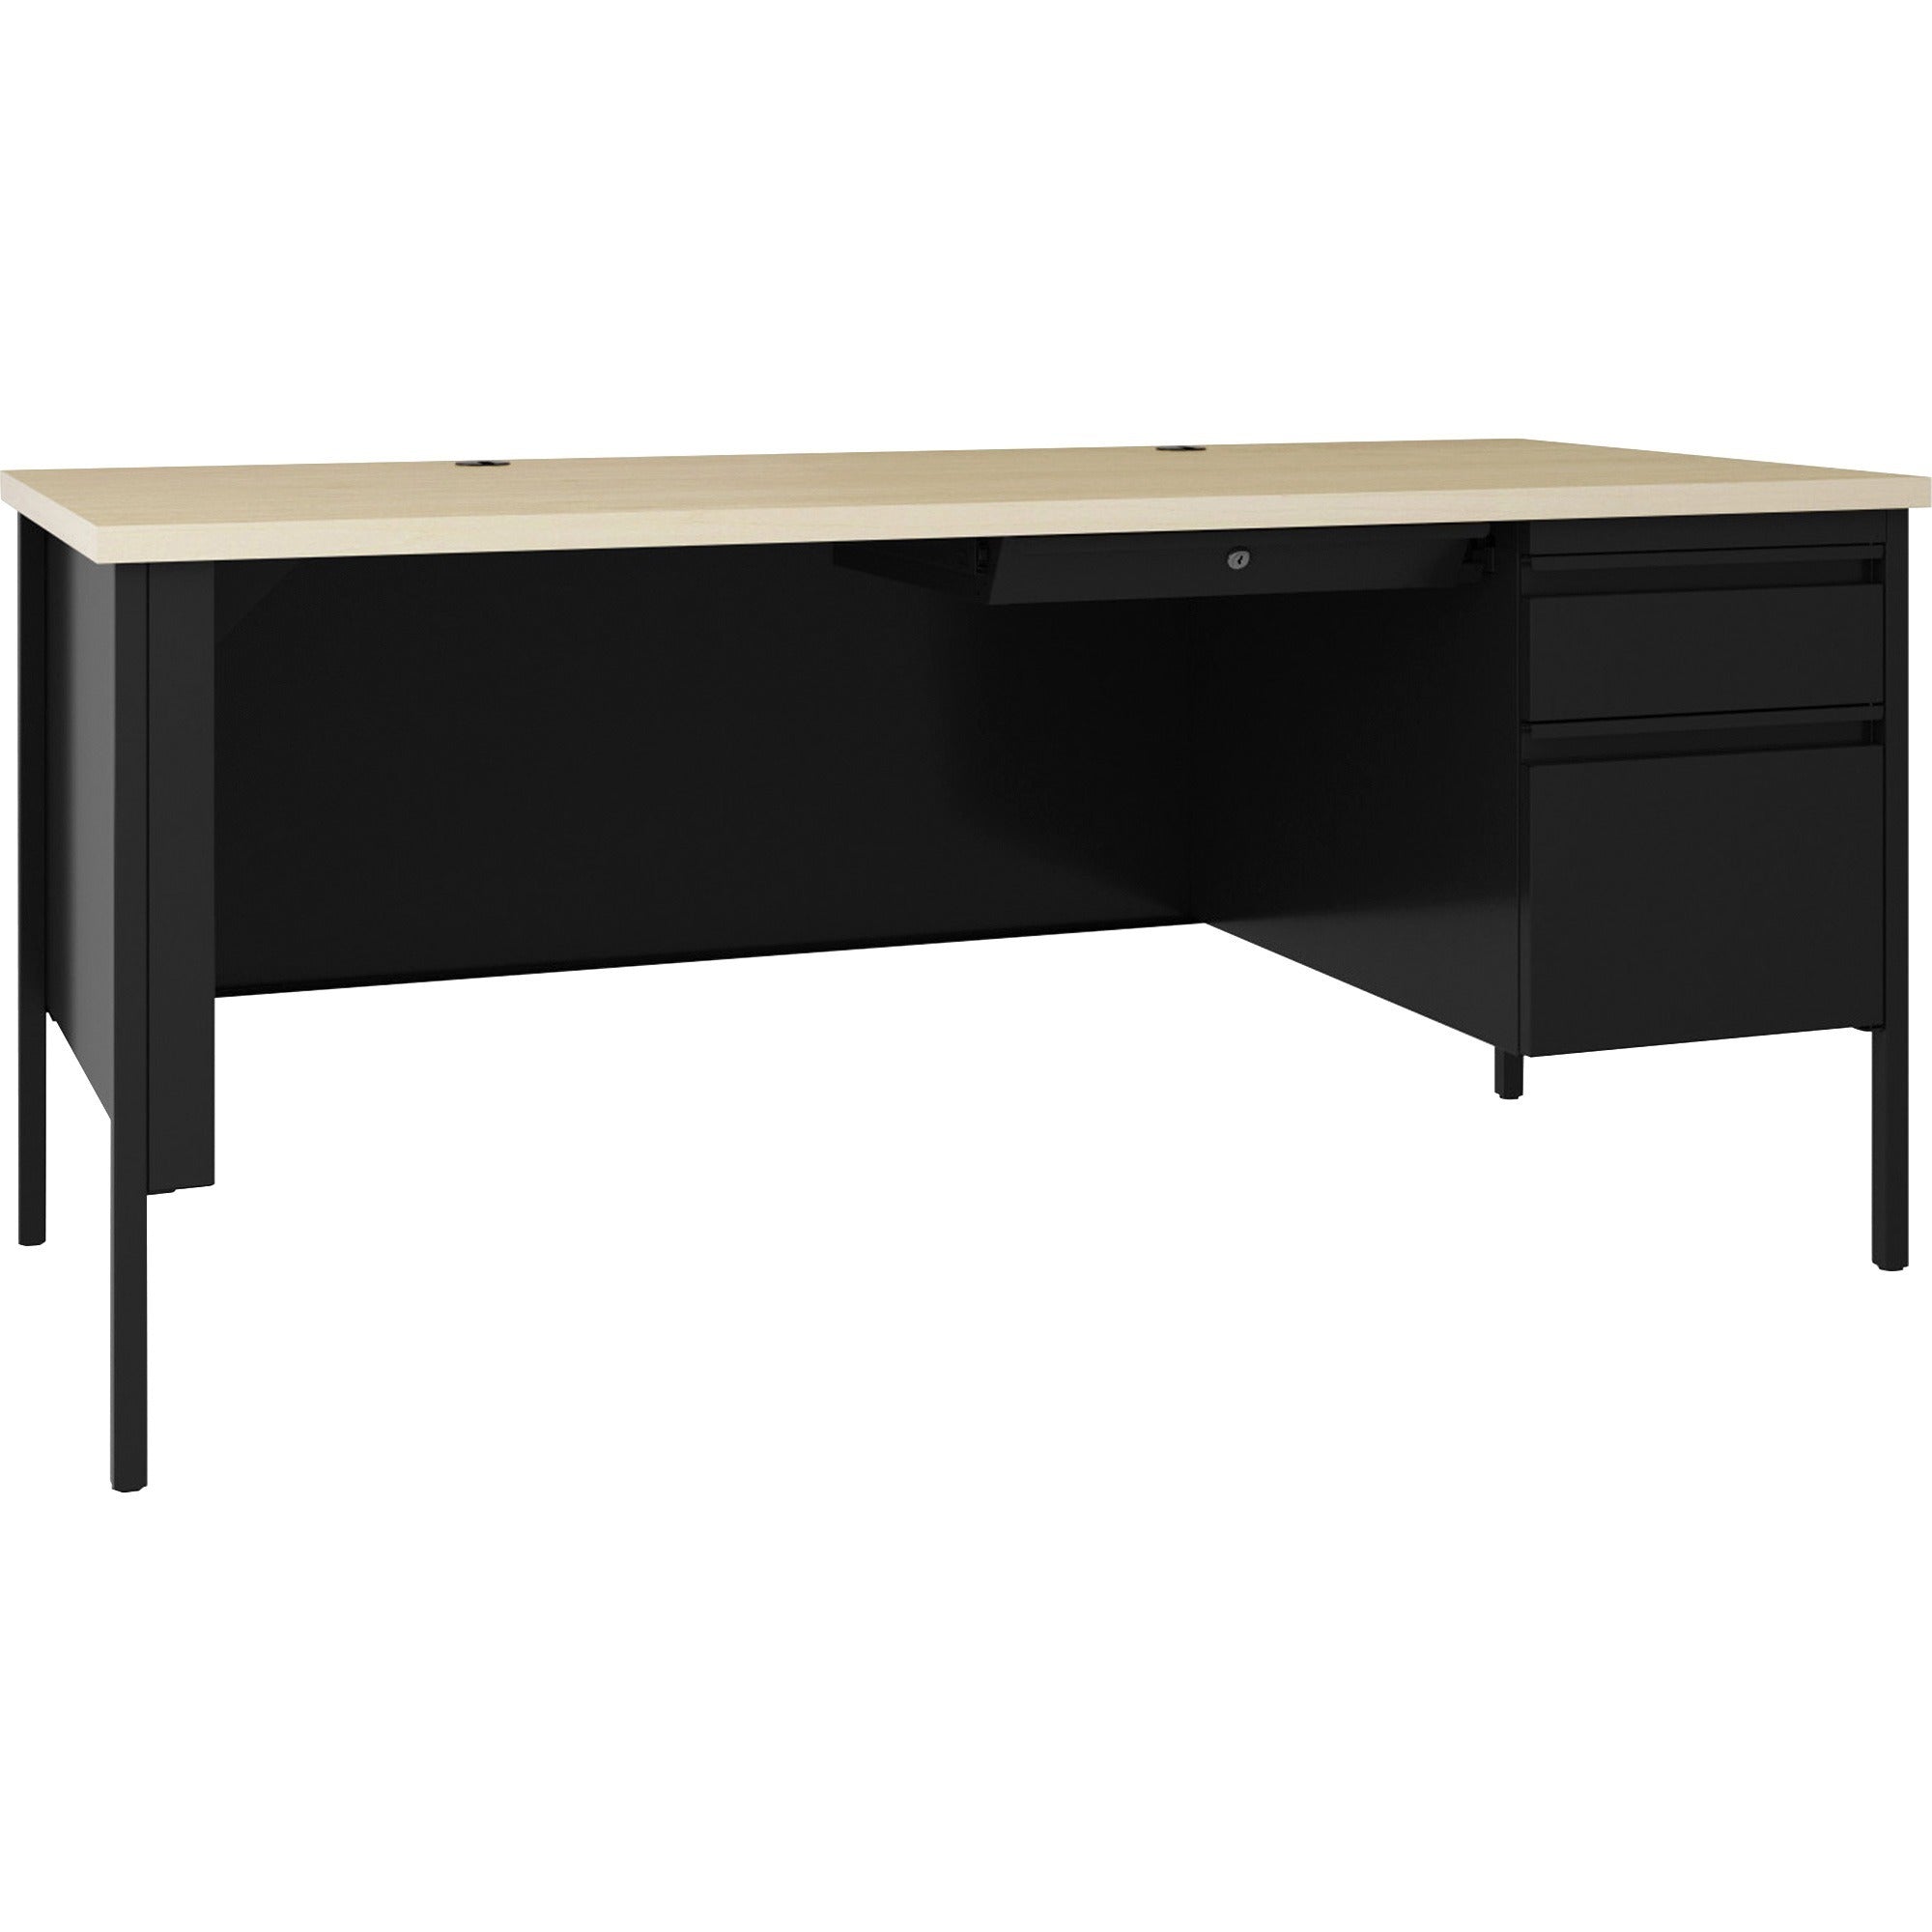 lorell-fortress-series-66-right-pedestal-desk-66-x-29530--08-modesty-panel-11-top-single-pedestal-on-right-side-square-edge-material-steel-finish-black_llr66906 - 1